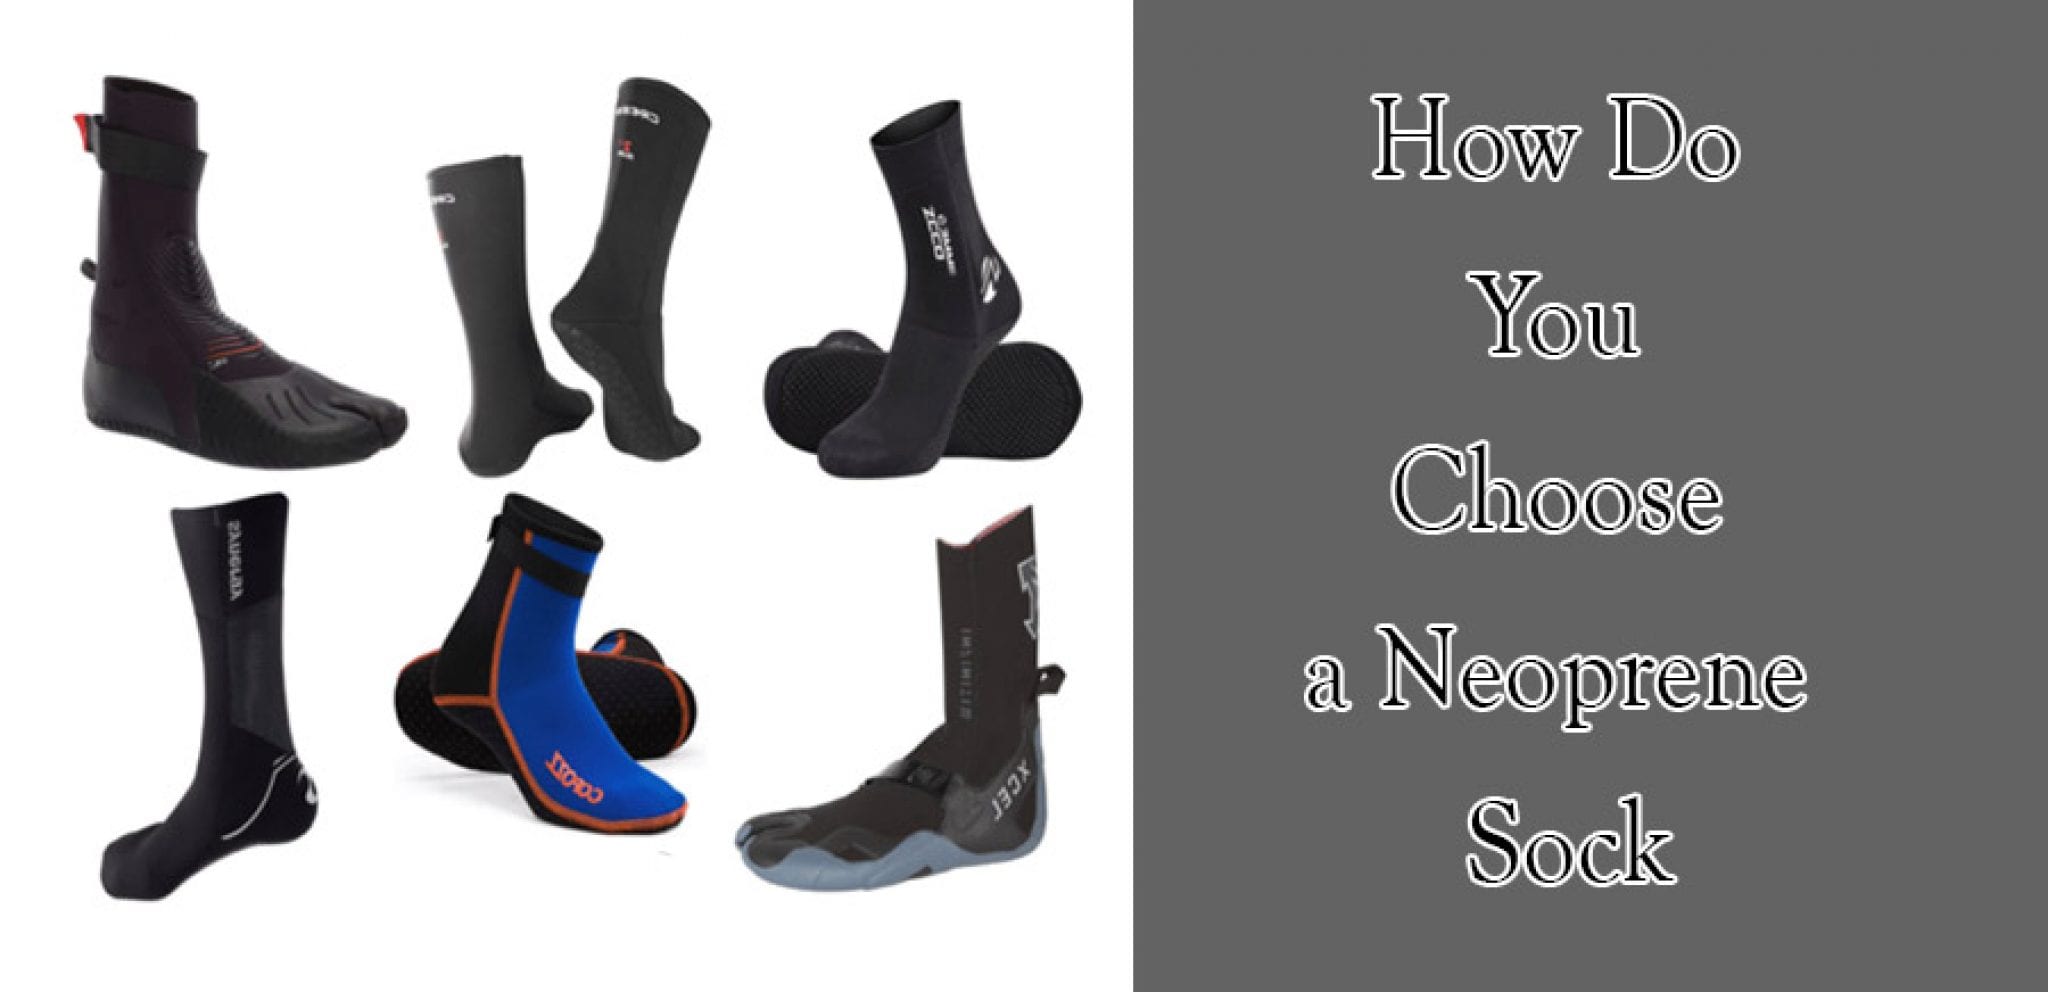 Do You Wear Socks With Water Shoes? | Ten Reviewed